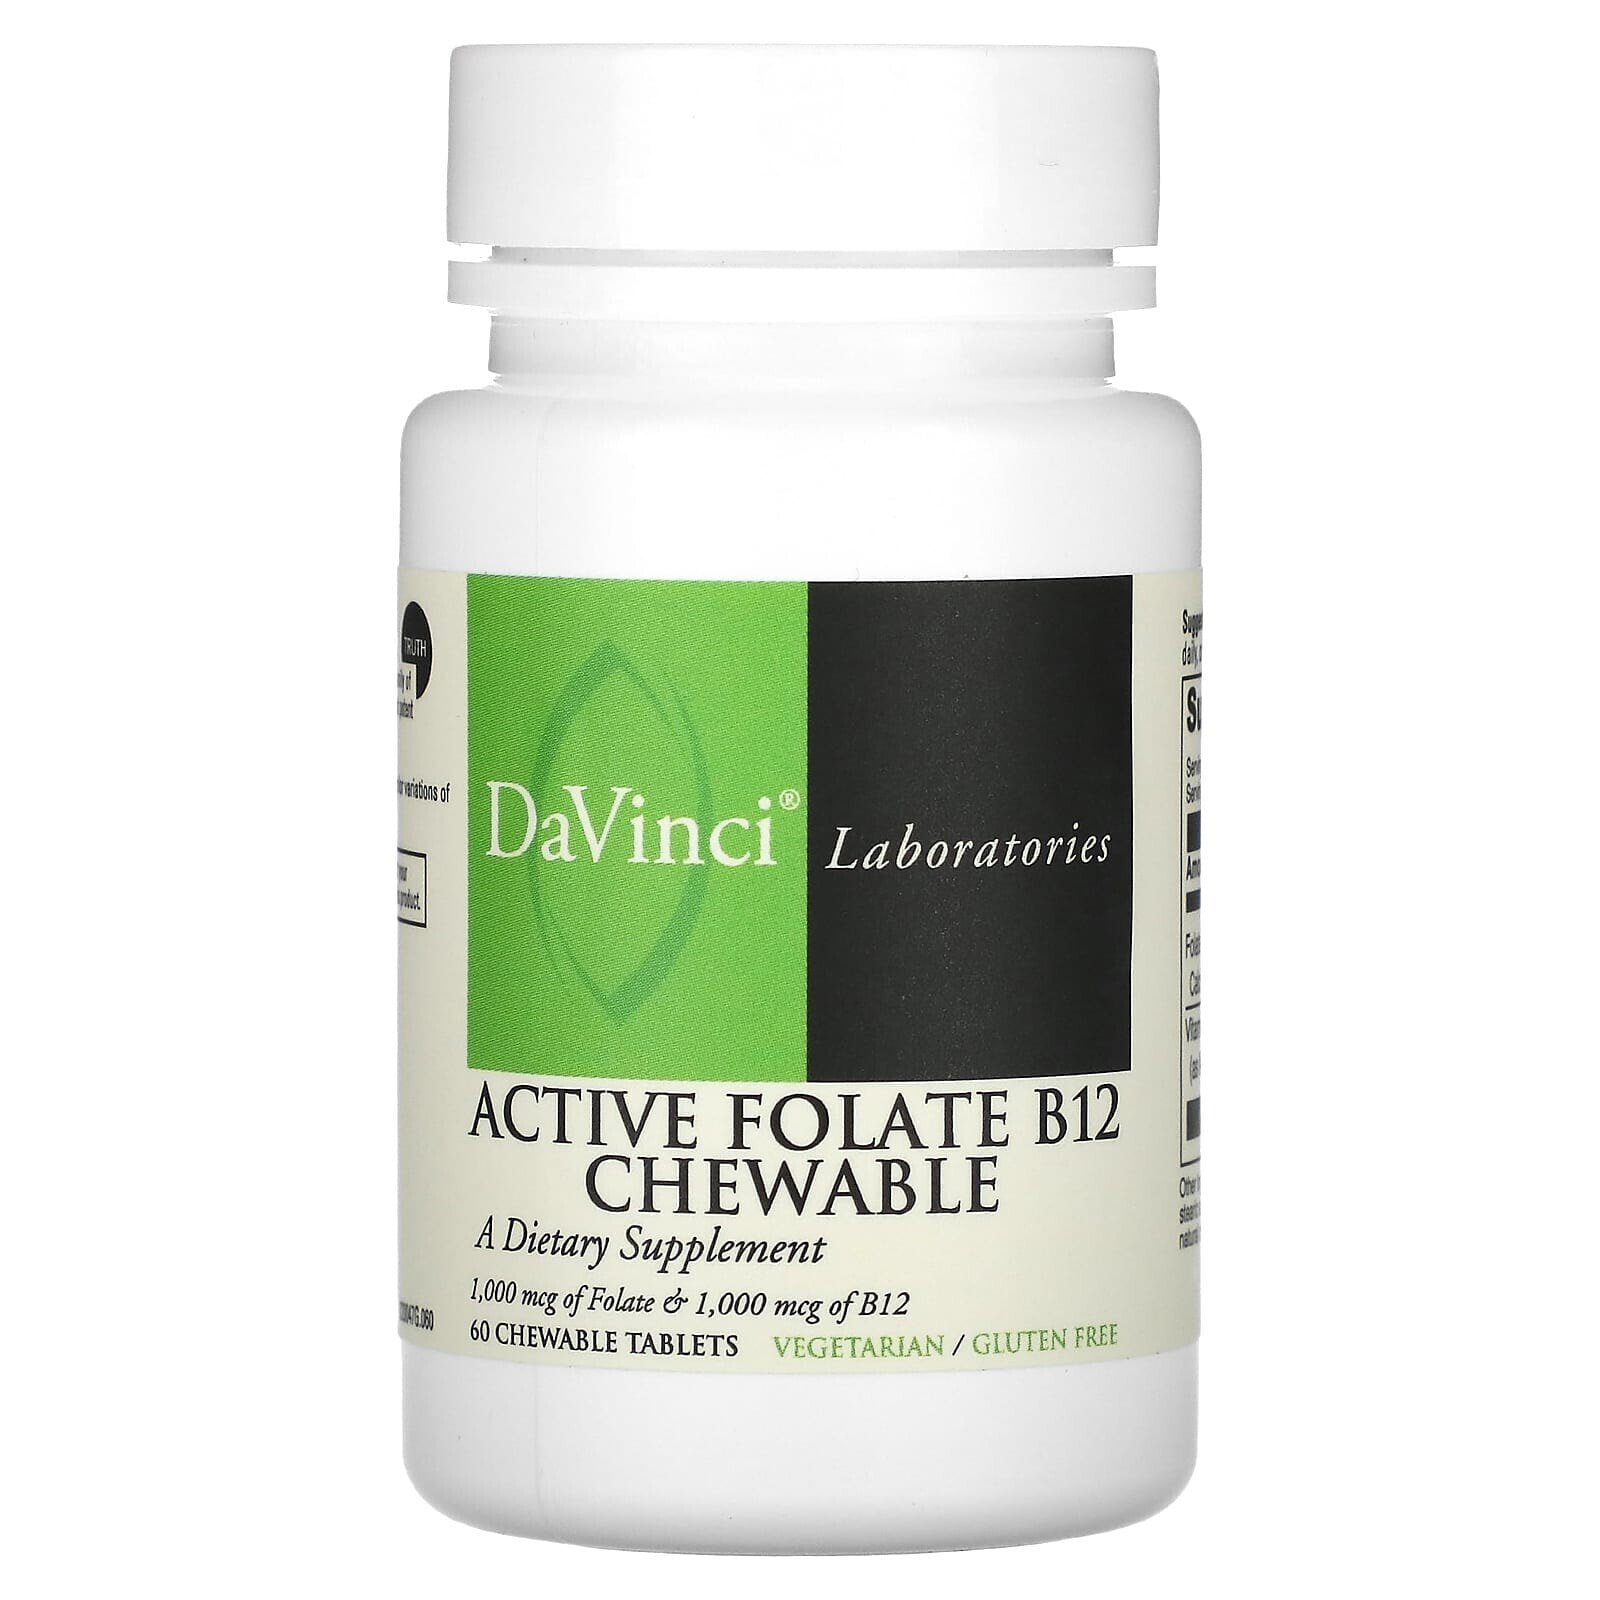 Active Folate B12 Chewable, 60 Chewable Tablets